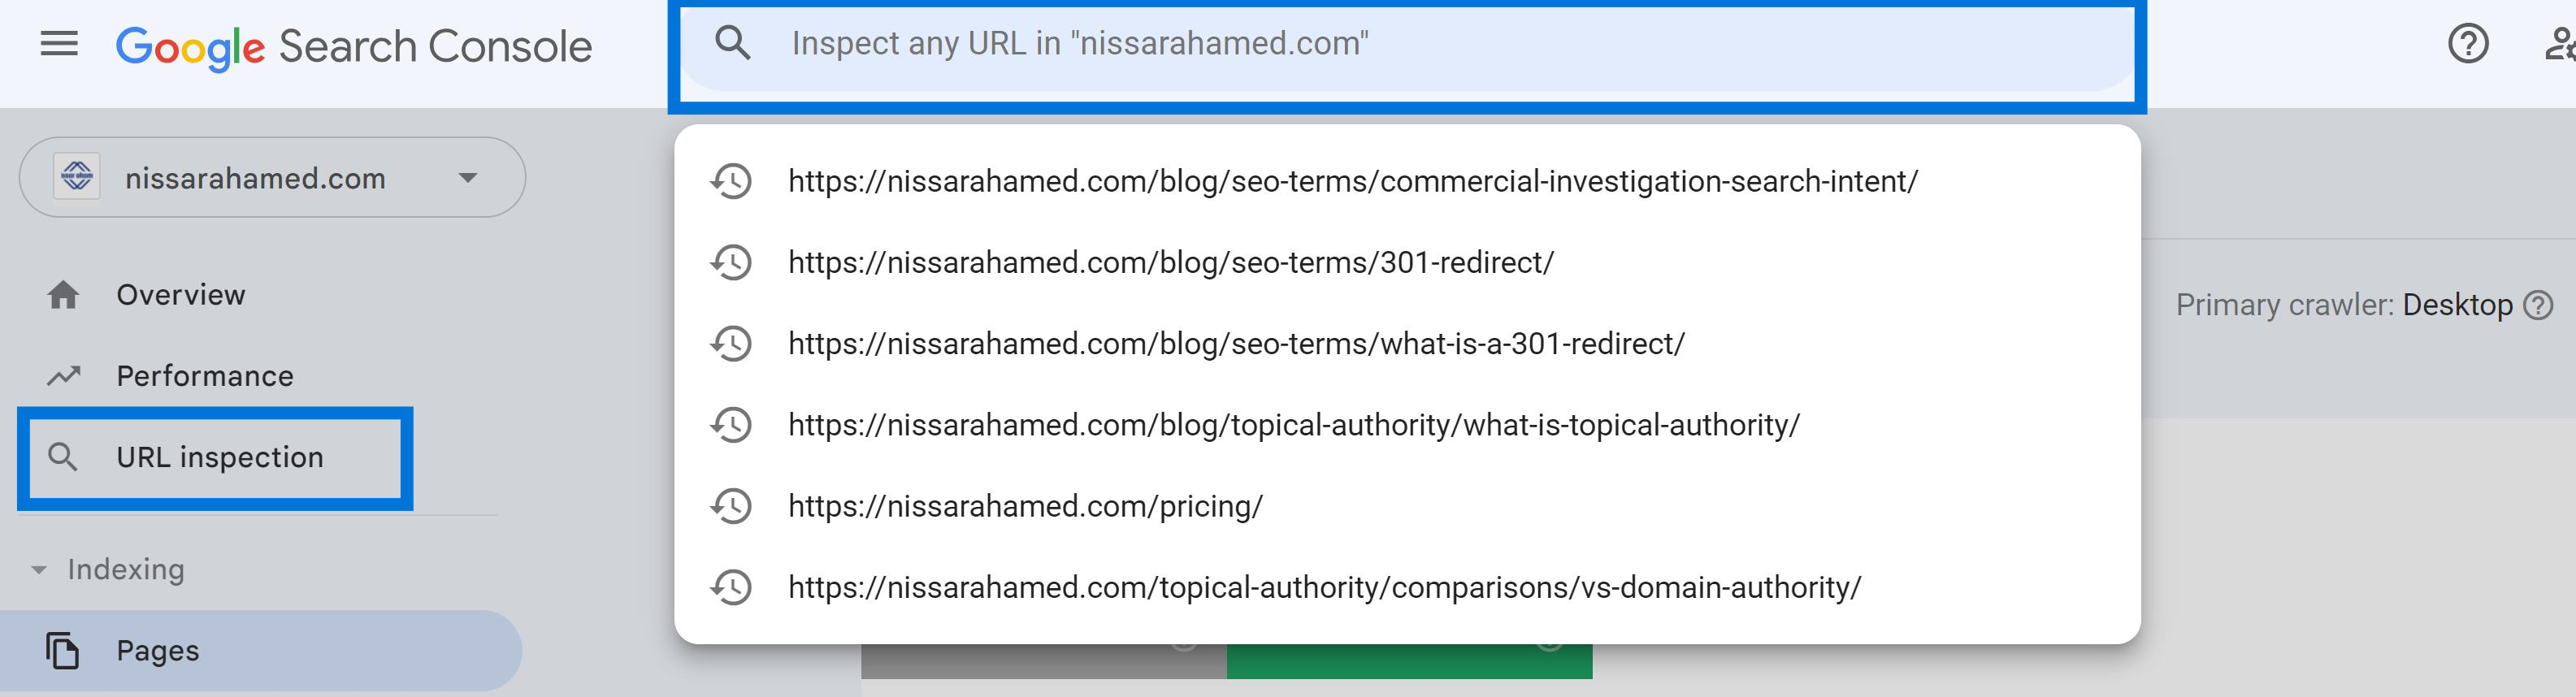 Google Search Console Search URL Inspection